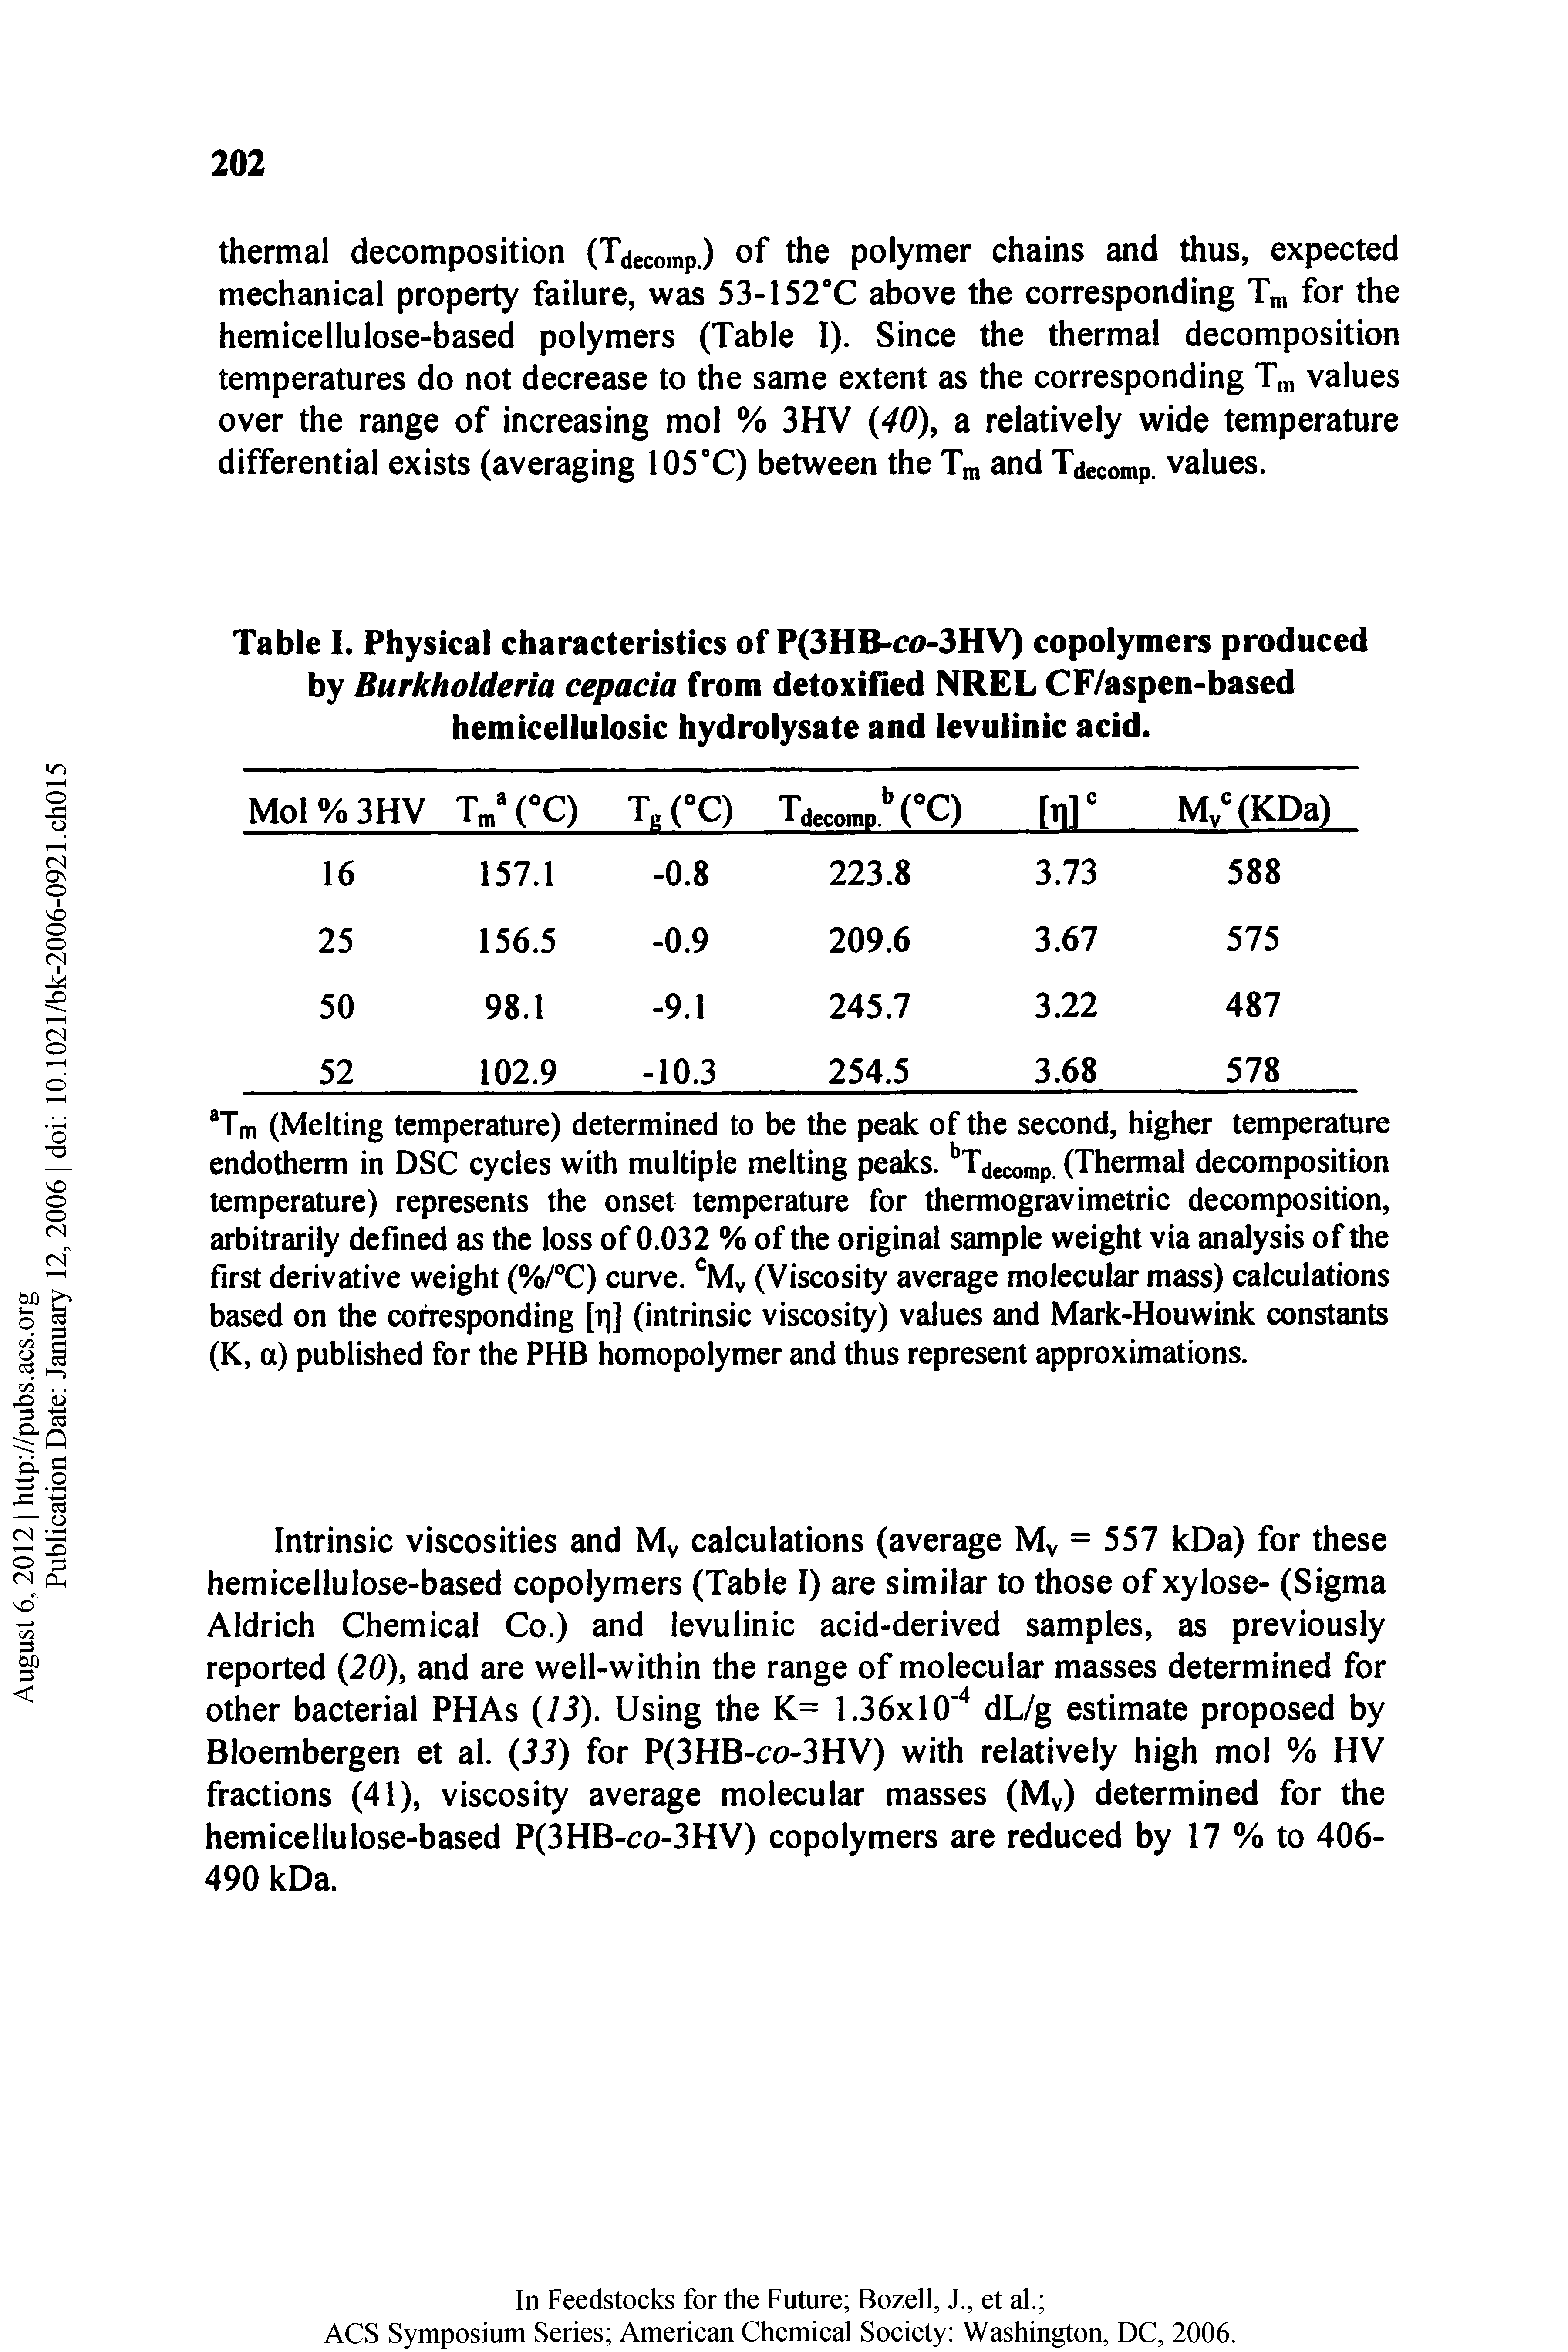 Table 1. Physical characteristics of P(3HB-cii-3HV) copolymers produced by Burkholderia cepacia from detoxified NREL CF/aspen-based hemicellulosic hydrolysate and levulinic acid.